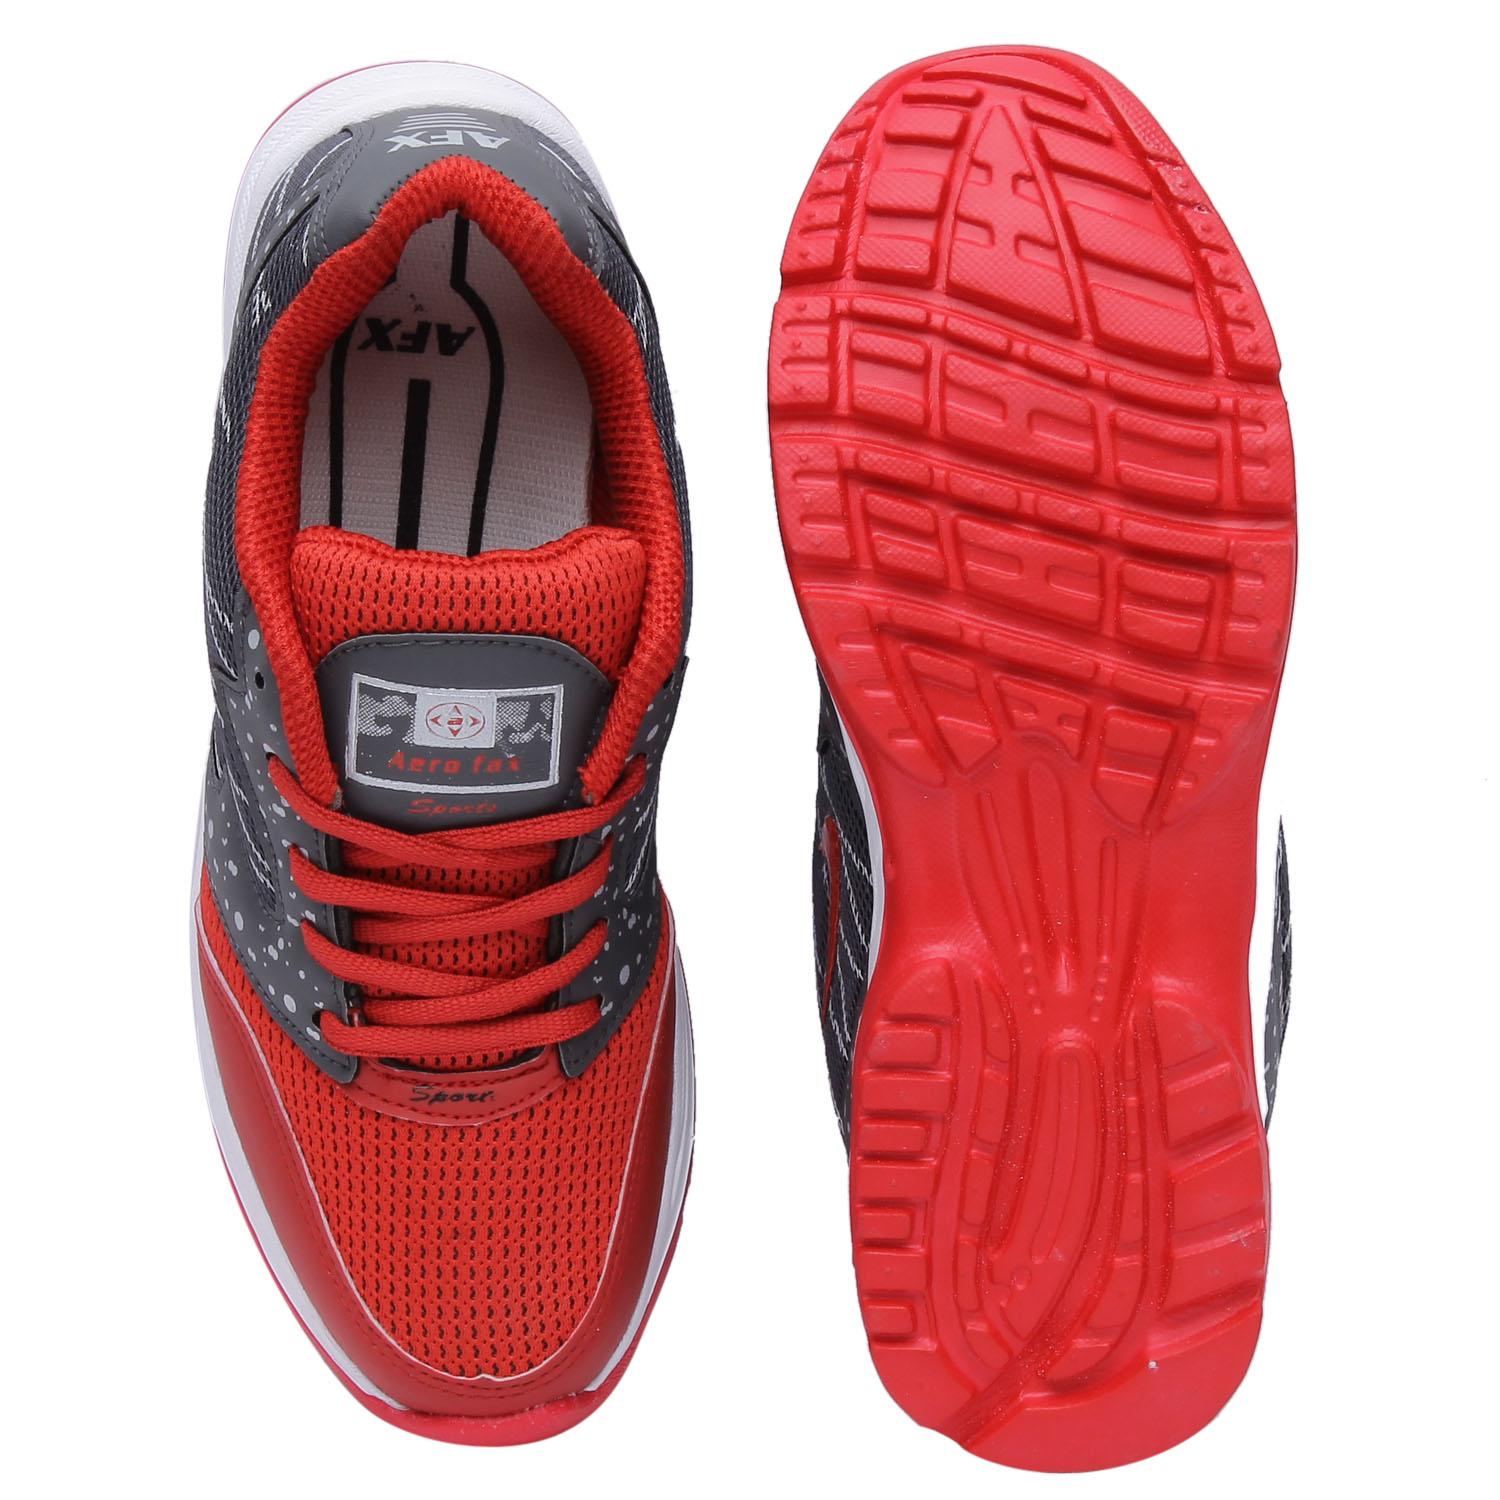 Buy Look Hook Aerofax Men Red Lace-up Training Shoes Online - Get 48% Off